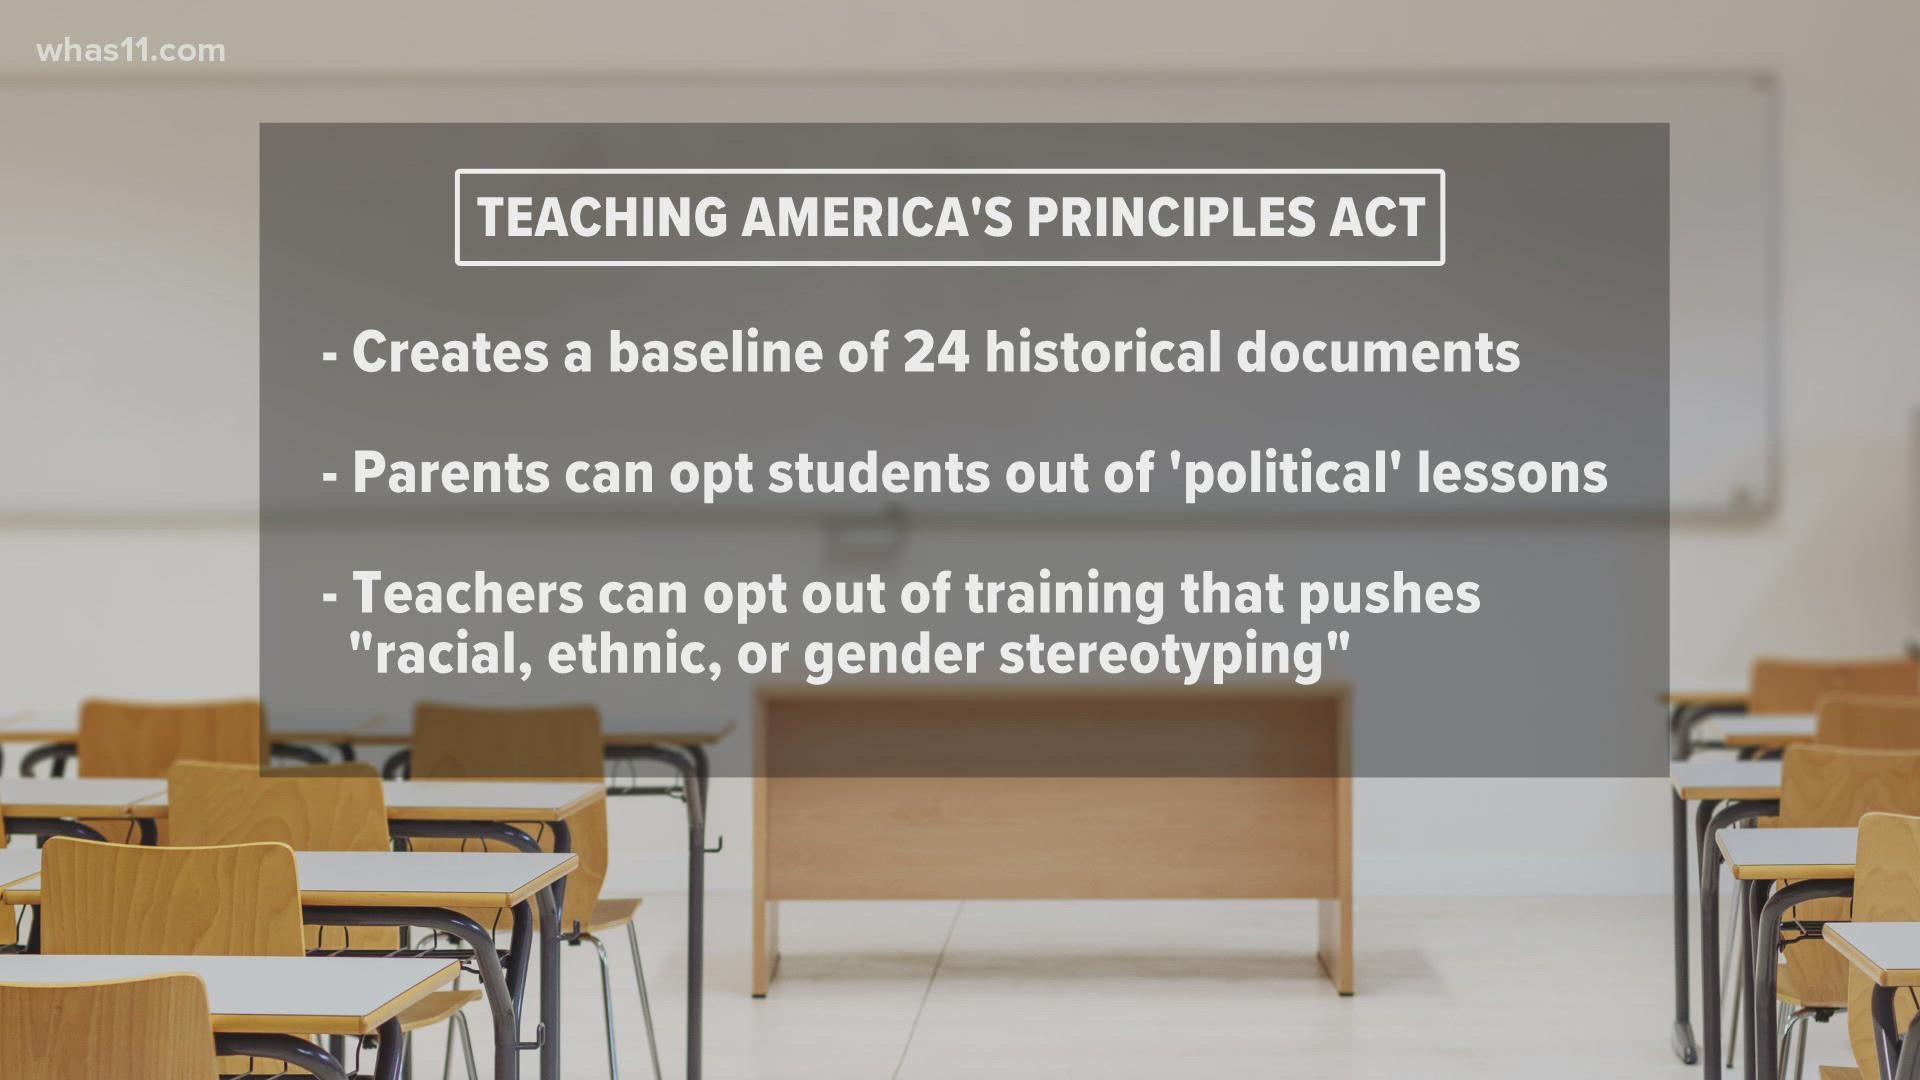 In a 9 to 4 vote, the Senate standing committee passed an education bill about American history and how students learn about it.